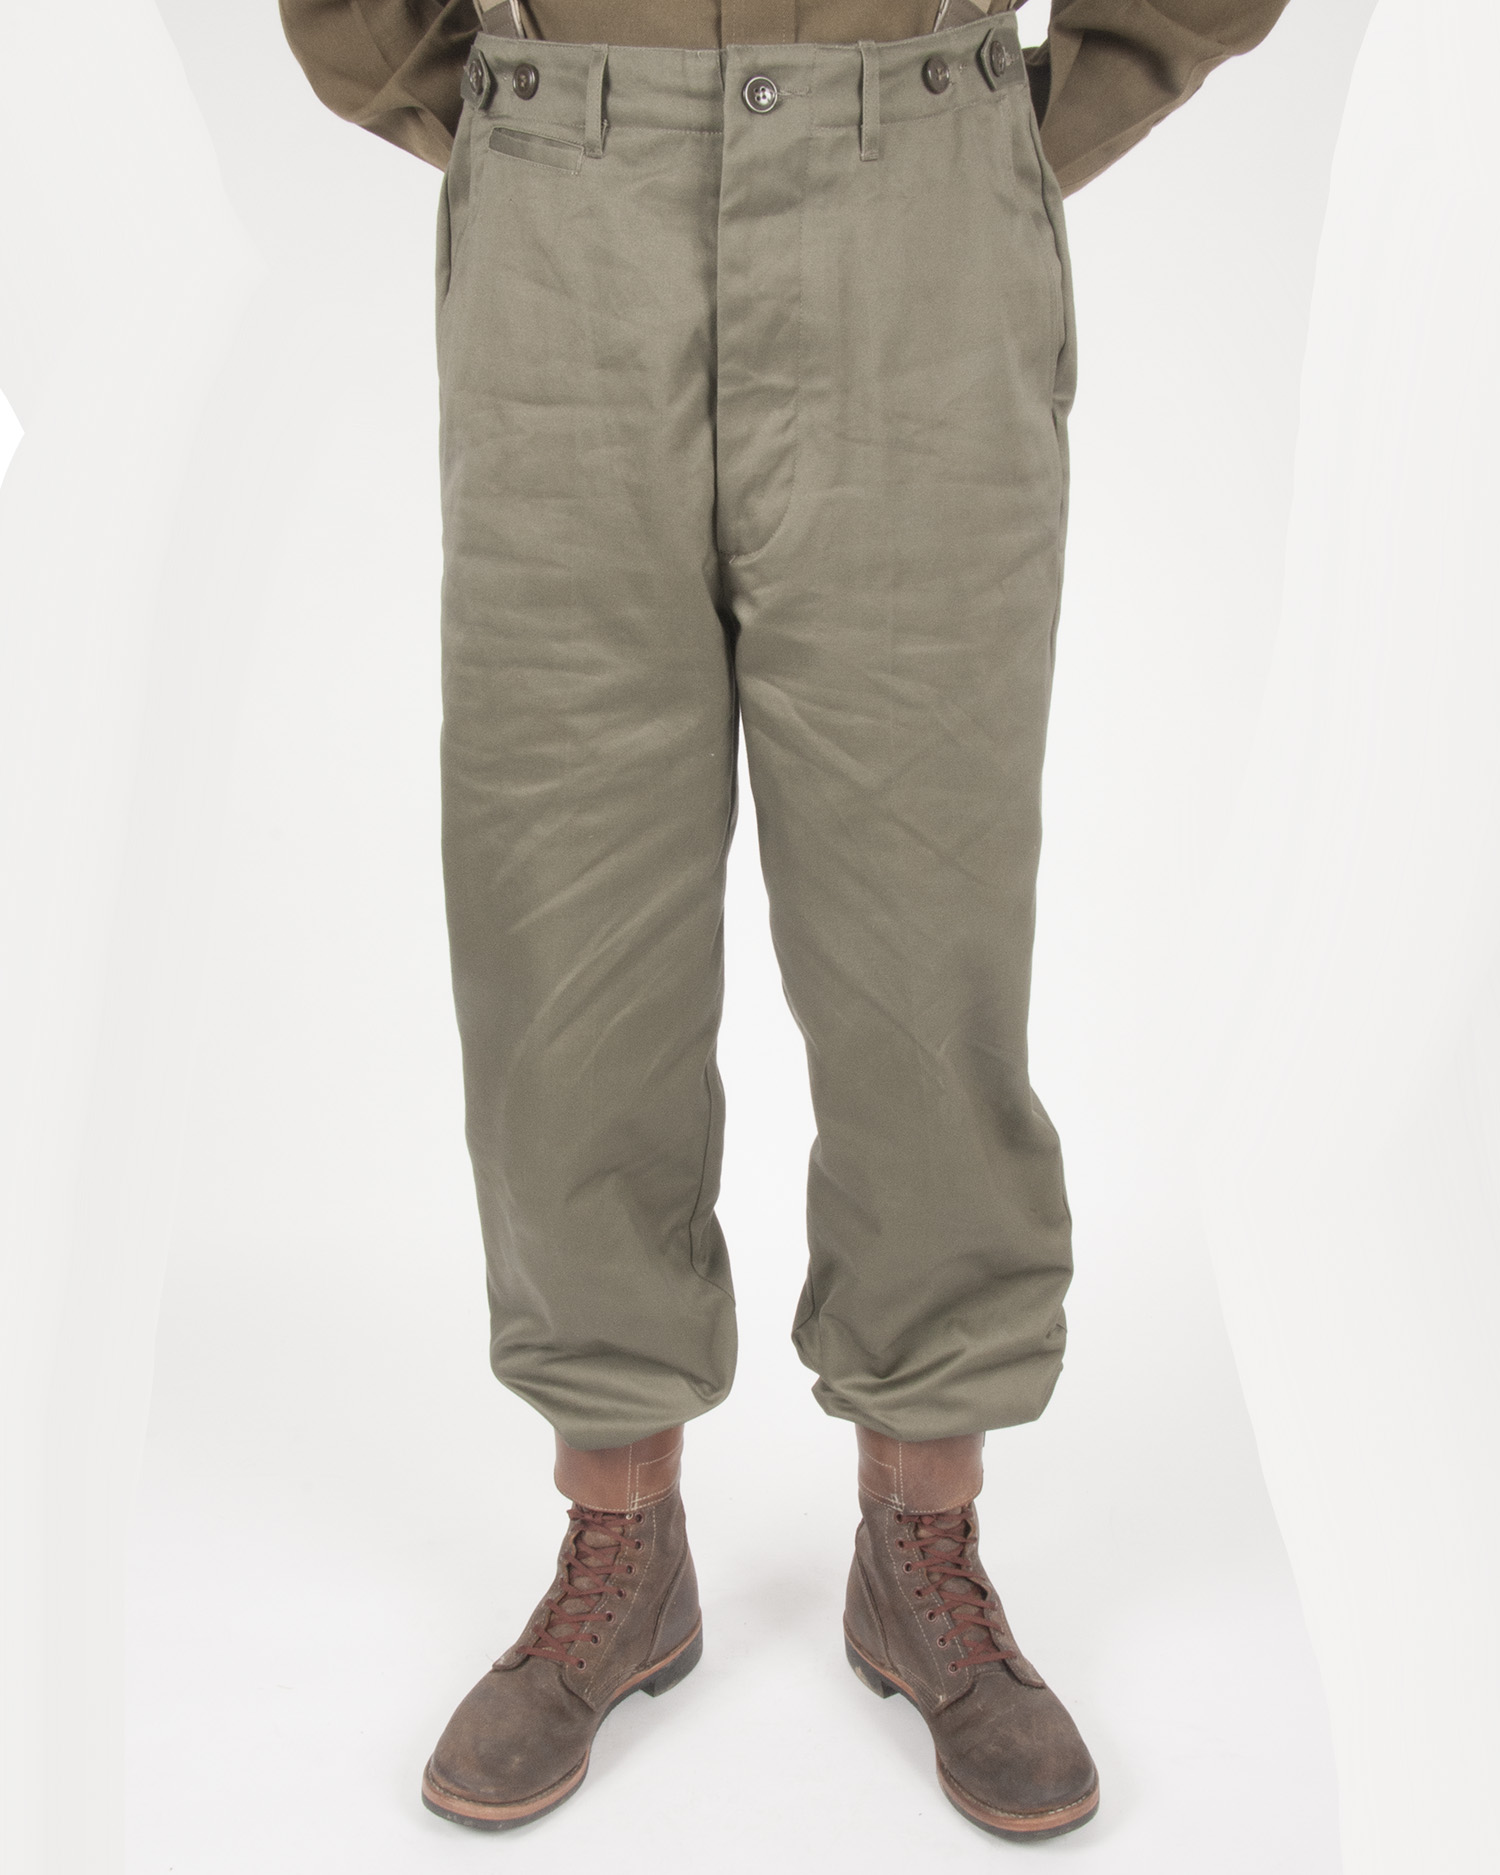 WWII US Army Field Trousers